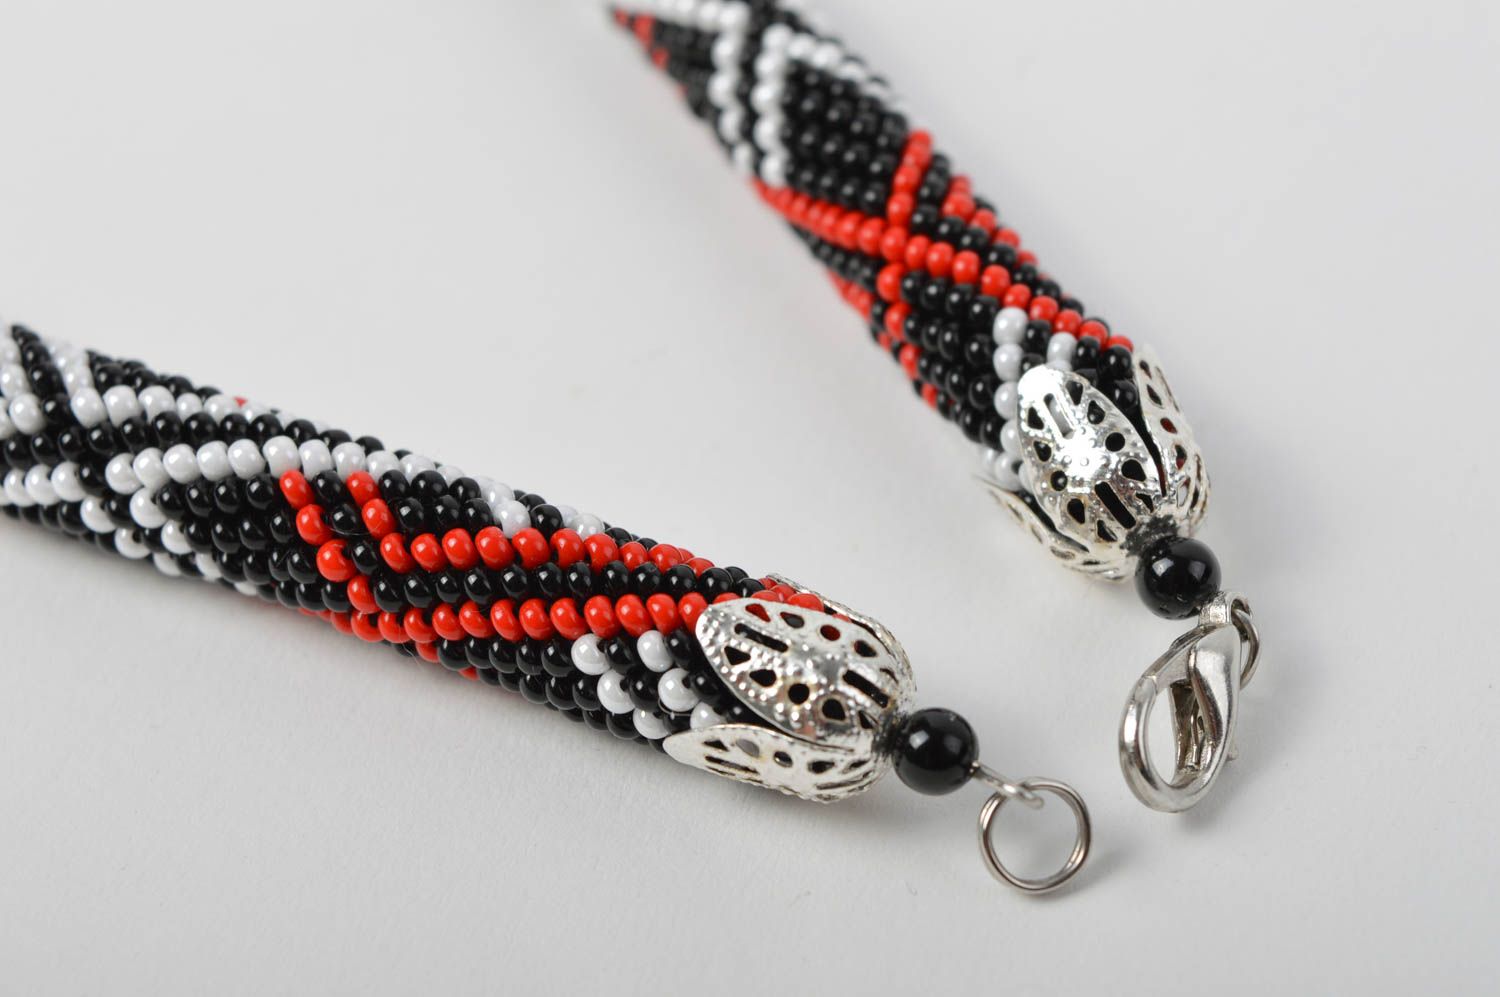 Handmade beaded cord necklace beautiful jewellery woven bead necklace designs photo 4